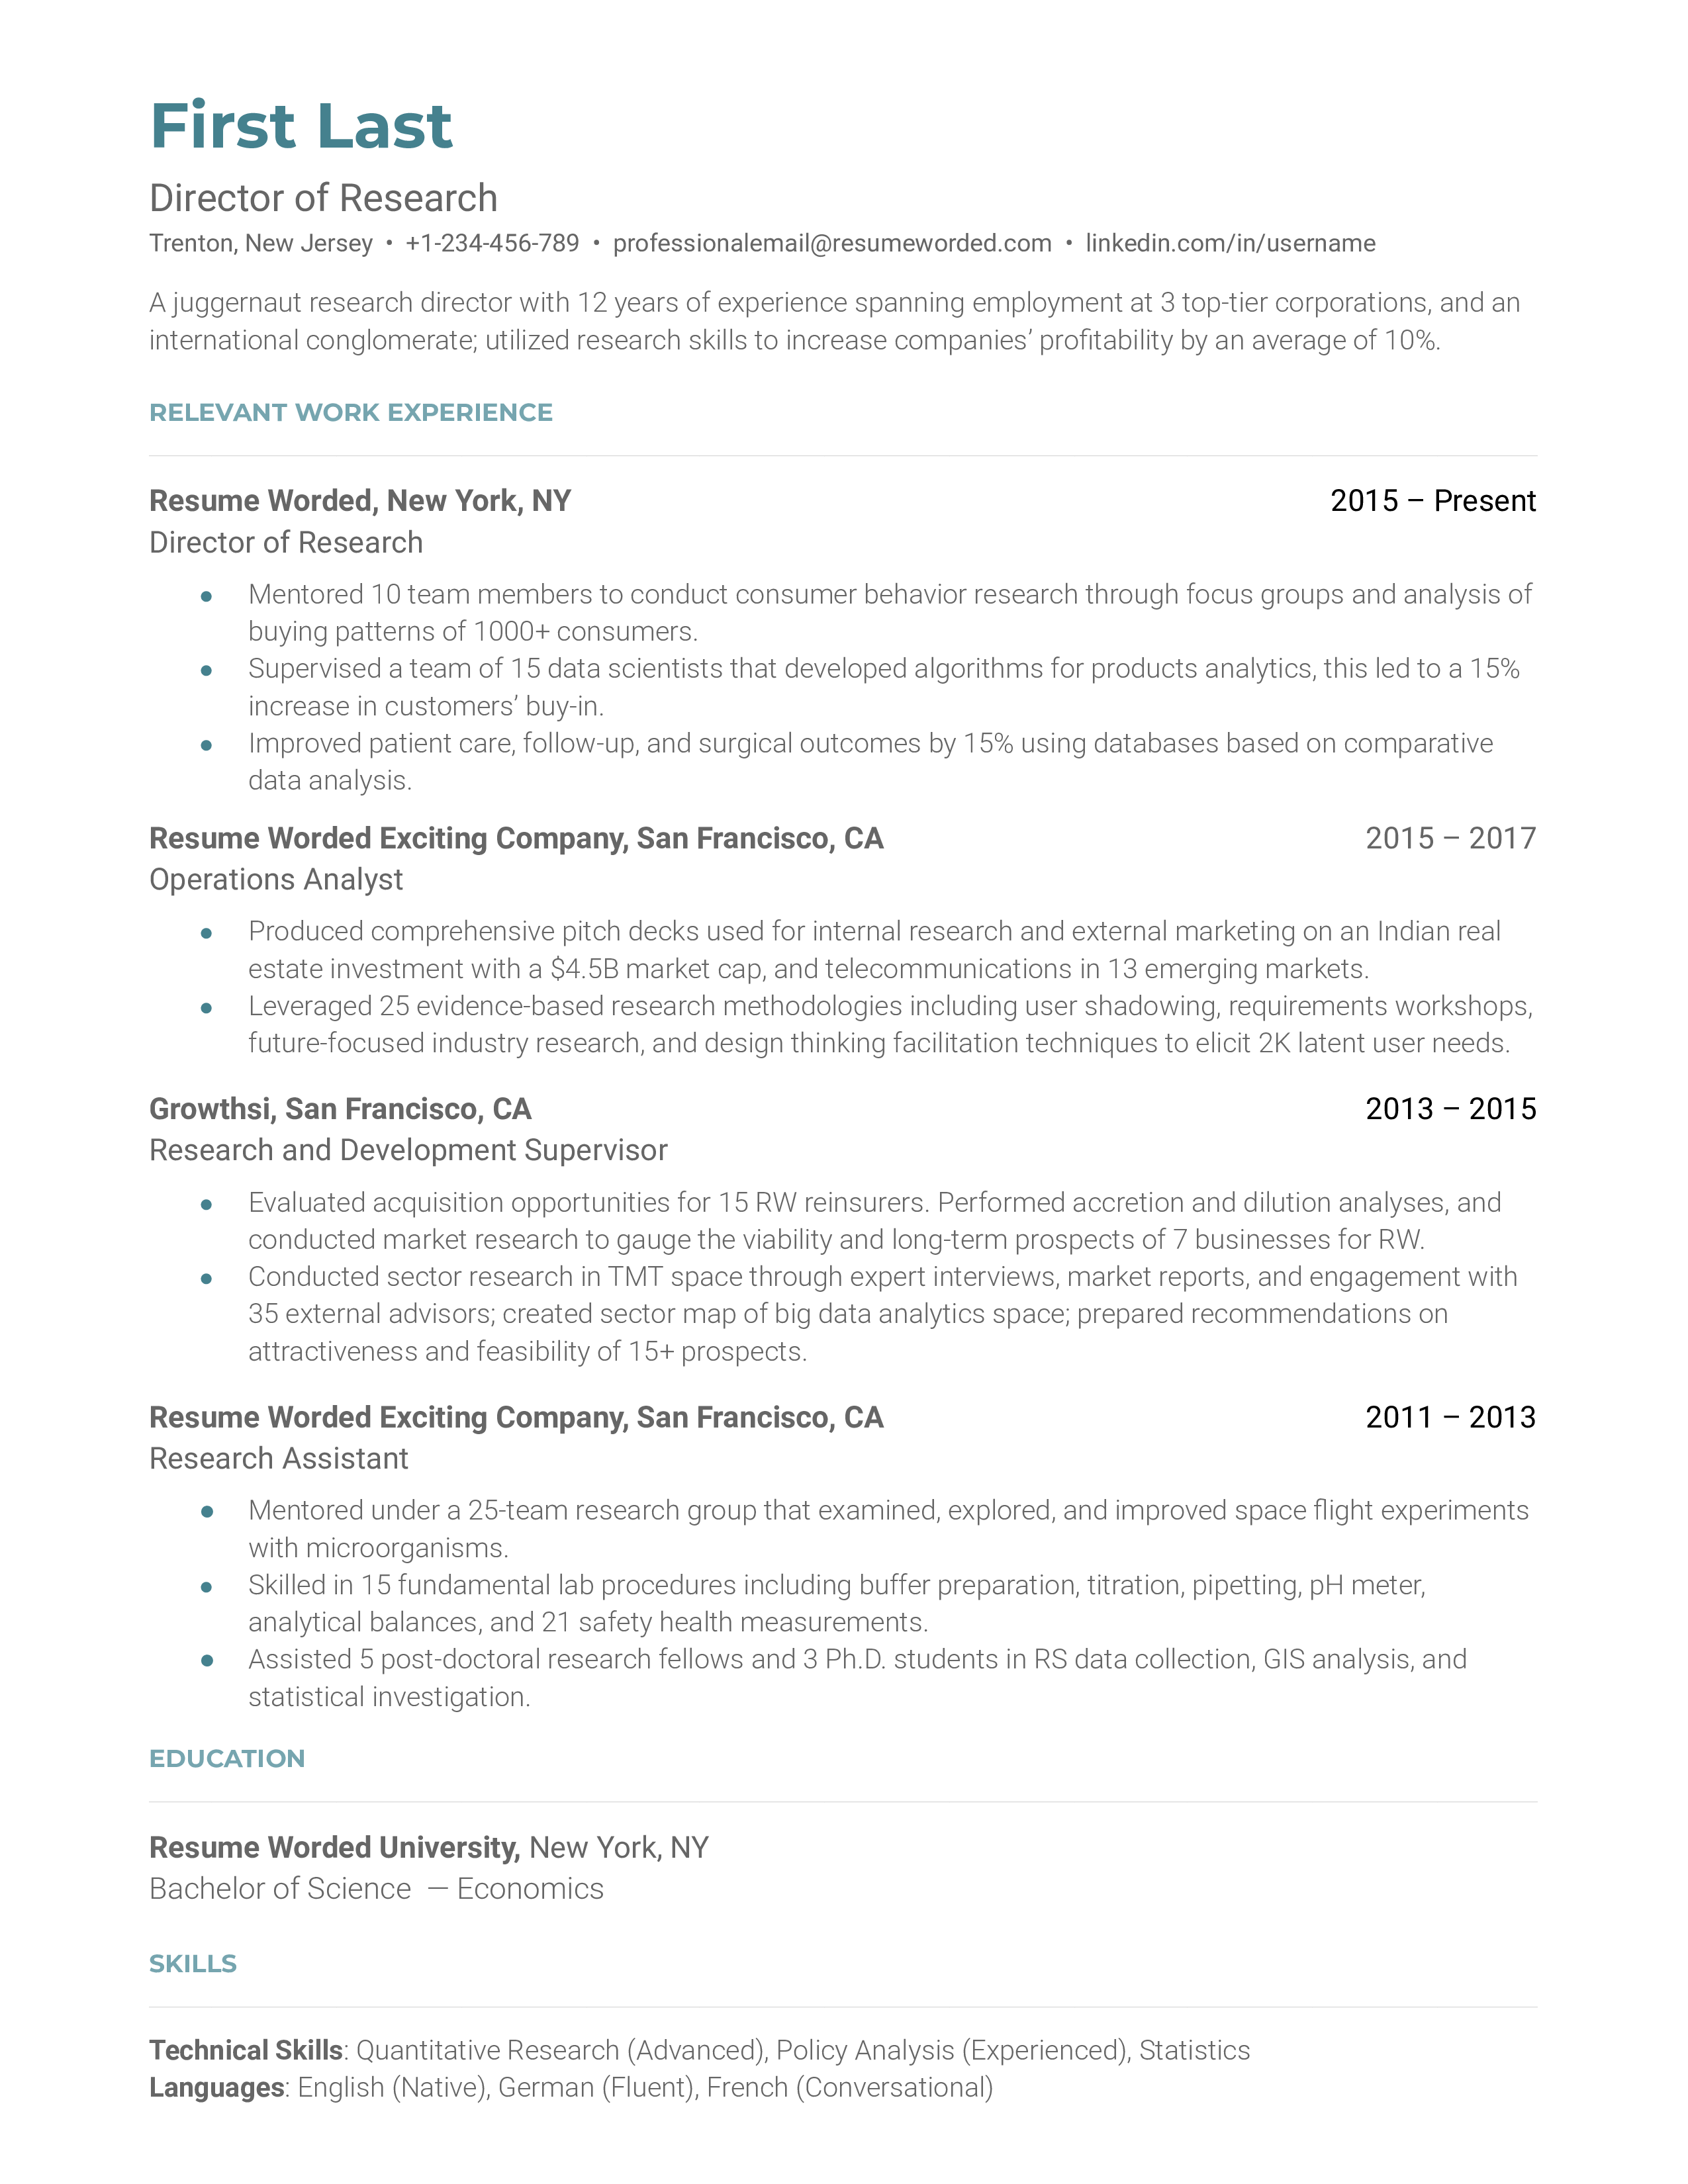 A detailed CV for a Director of Research position showcasing strategic thinking and technical acumen